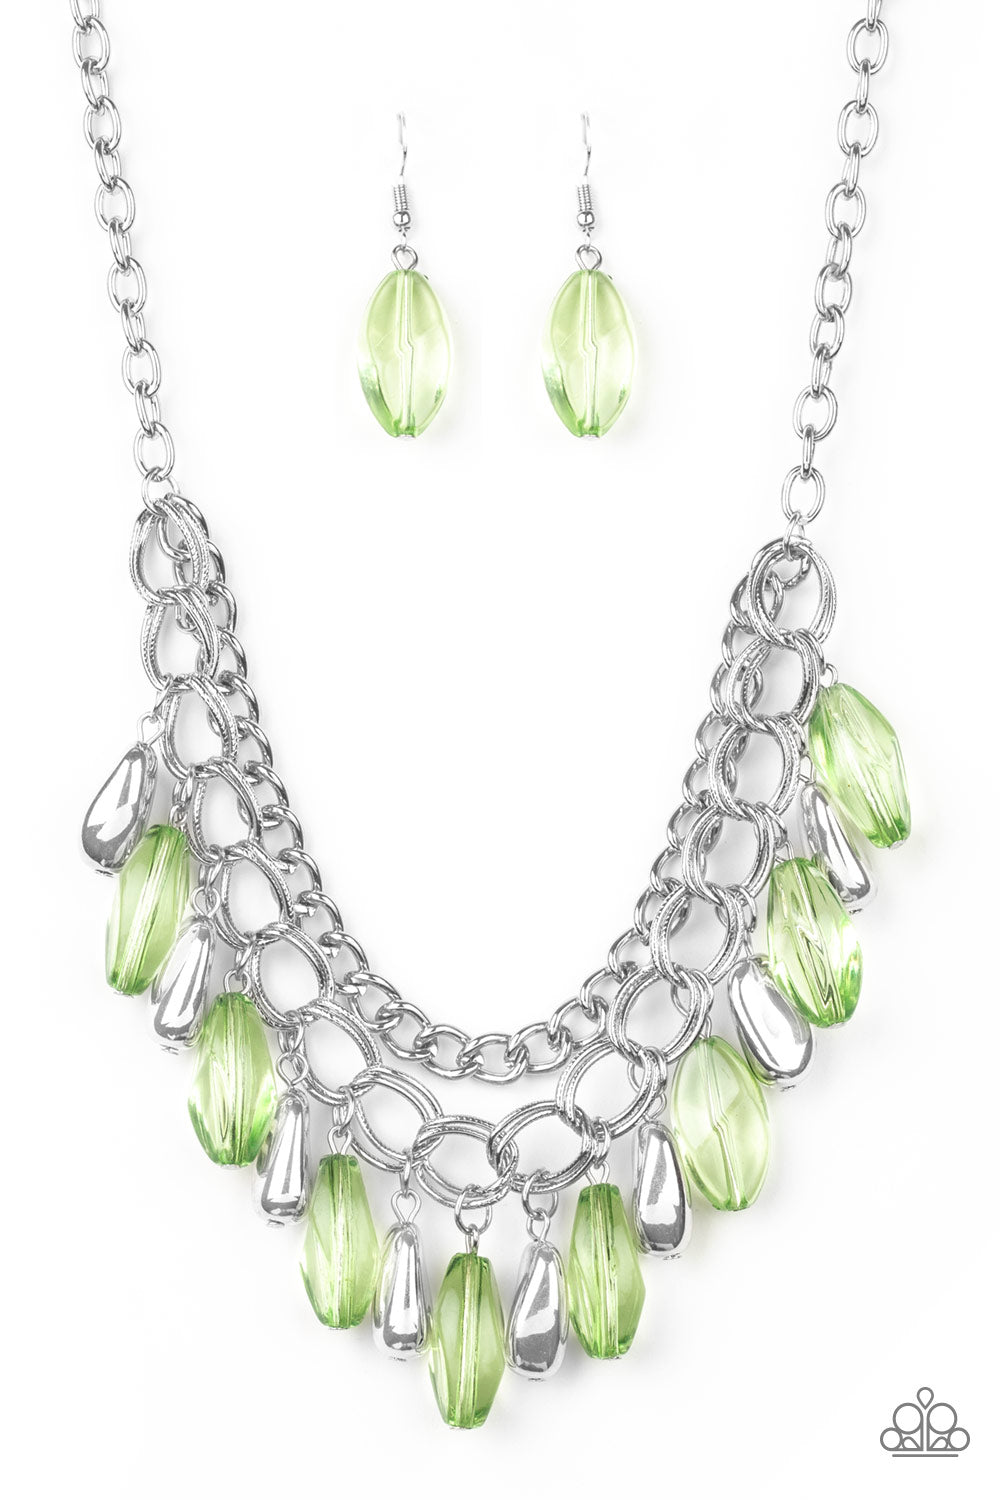 Spring Daydream Green Paparazzi Necklaces Cashmere Pink Jewels - Cashmere Pink Jewels & Accessories, Cashmere Pink Jewels & Accessories - Paparazzi